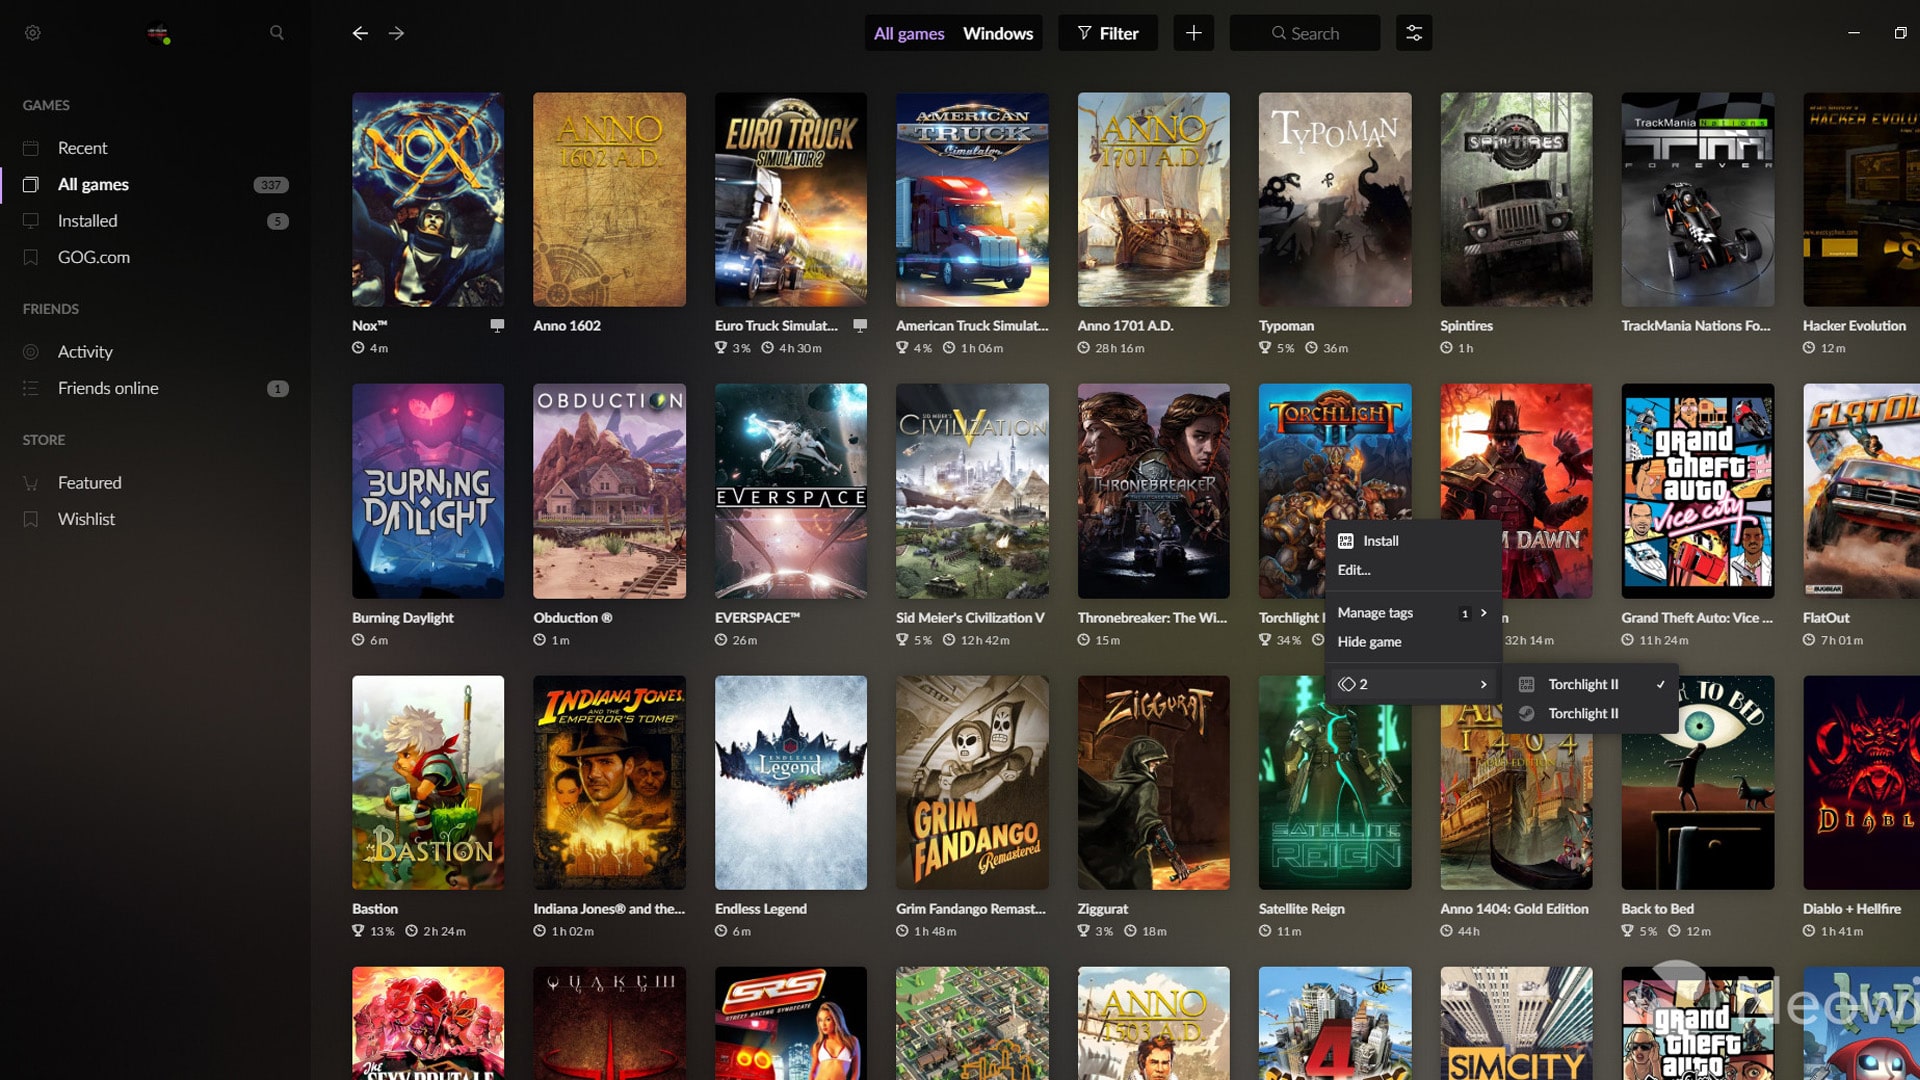 GOG Galaxy game library interface with various game titles displayed